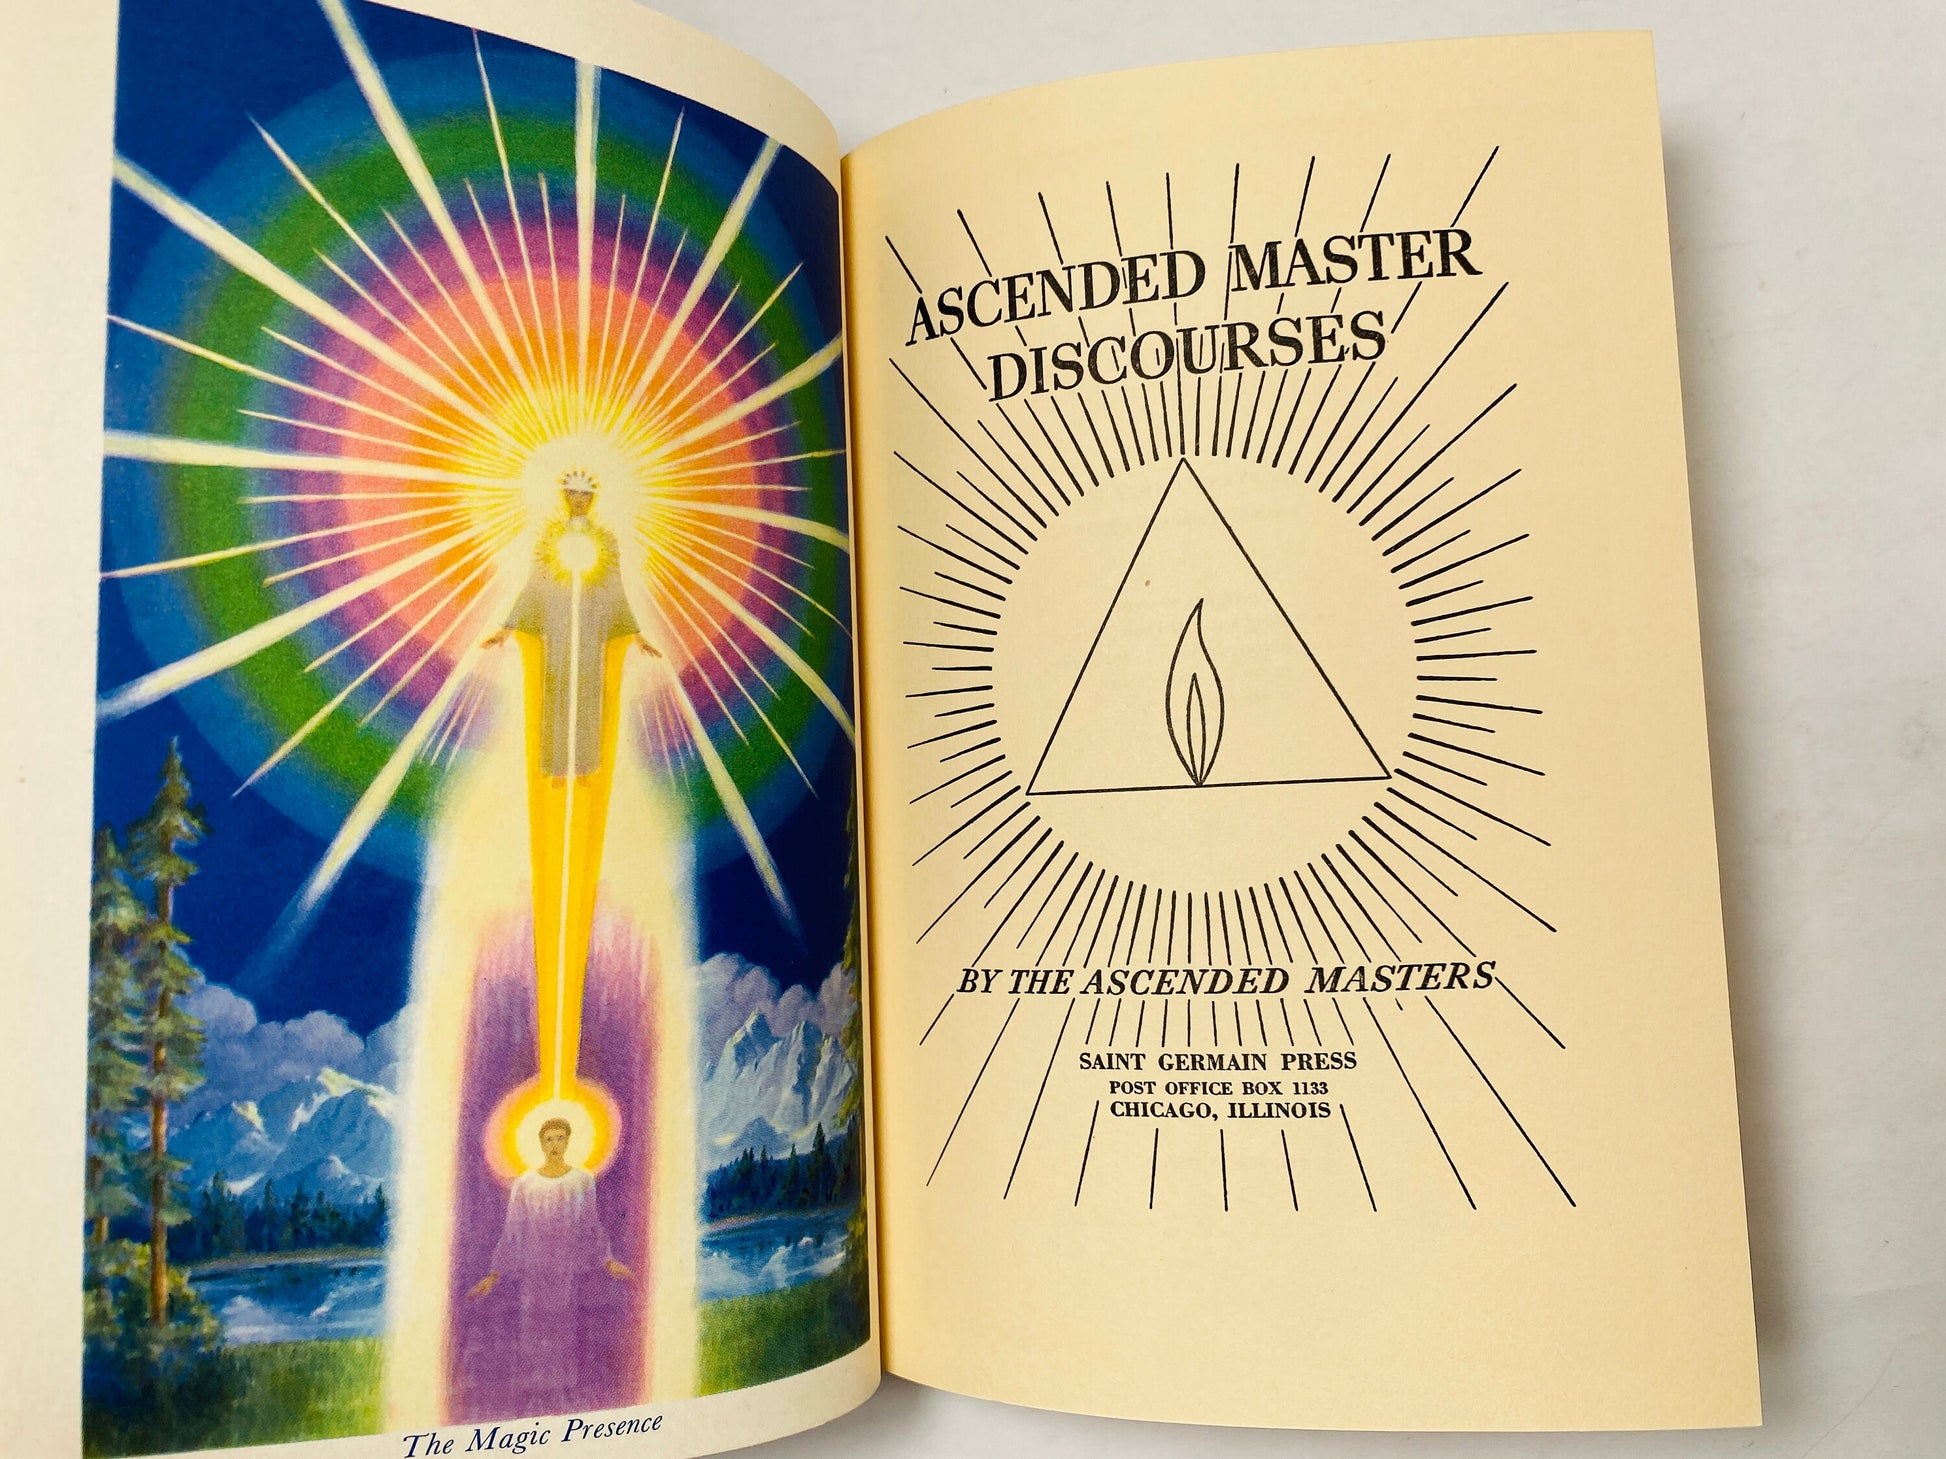 1937 Ascended Master Discourses Saint Germain vintage book Occult Psychic Phenomena Rare I Am Telepathy Clairvoyance New Age Spiritual